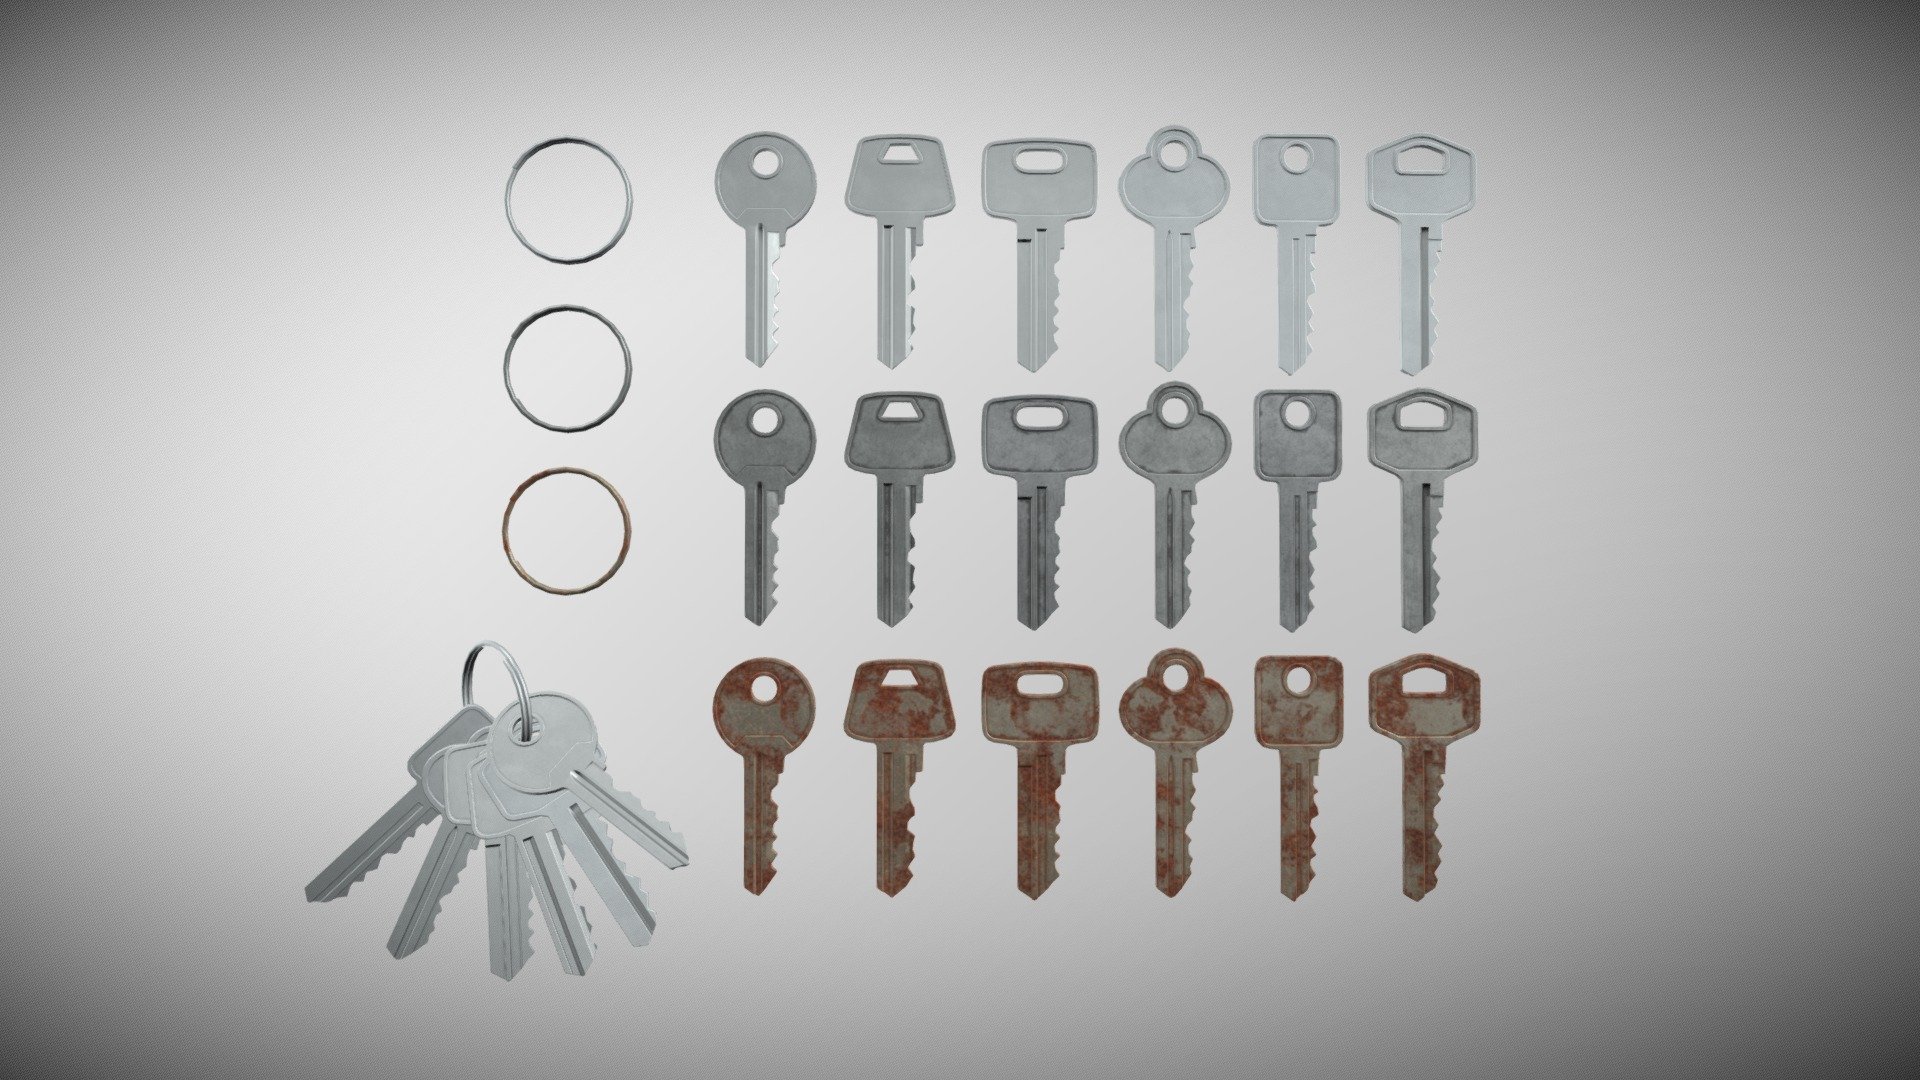 Free key ring: https://skfb.ly/oAuSt



Check individual keys: https://skfb.ly/oAuSK



[Zip File]

Collection Information:


6 Keys
1 key ring (Free)

Mesh Information:


Subdivision-ready models
Subdivision 0 Polycount (average): 2422
UV unwrapped

Texture Information:


Three types of texture: New, Used, Old
Texture size: 2048x2048
BaseColor
Roughness
Metallic
Normal OpenGL and DirectX
PNG format

Formats include: 
- .obj
- .fbx
- .blend

~ If you have questions or problems, please feel free to contact me 3d model